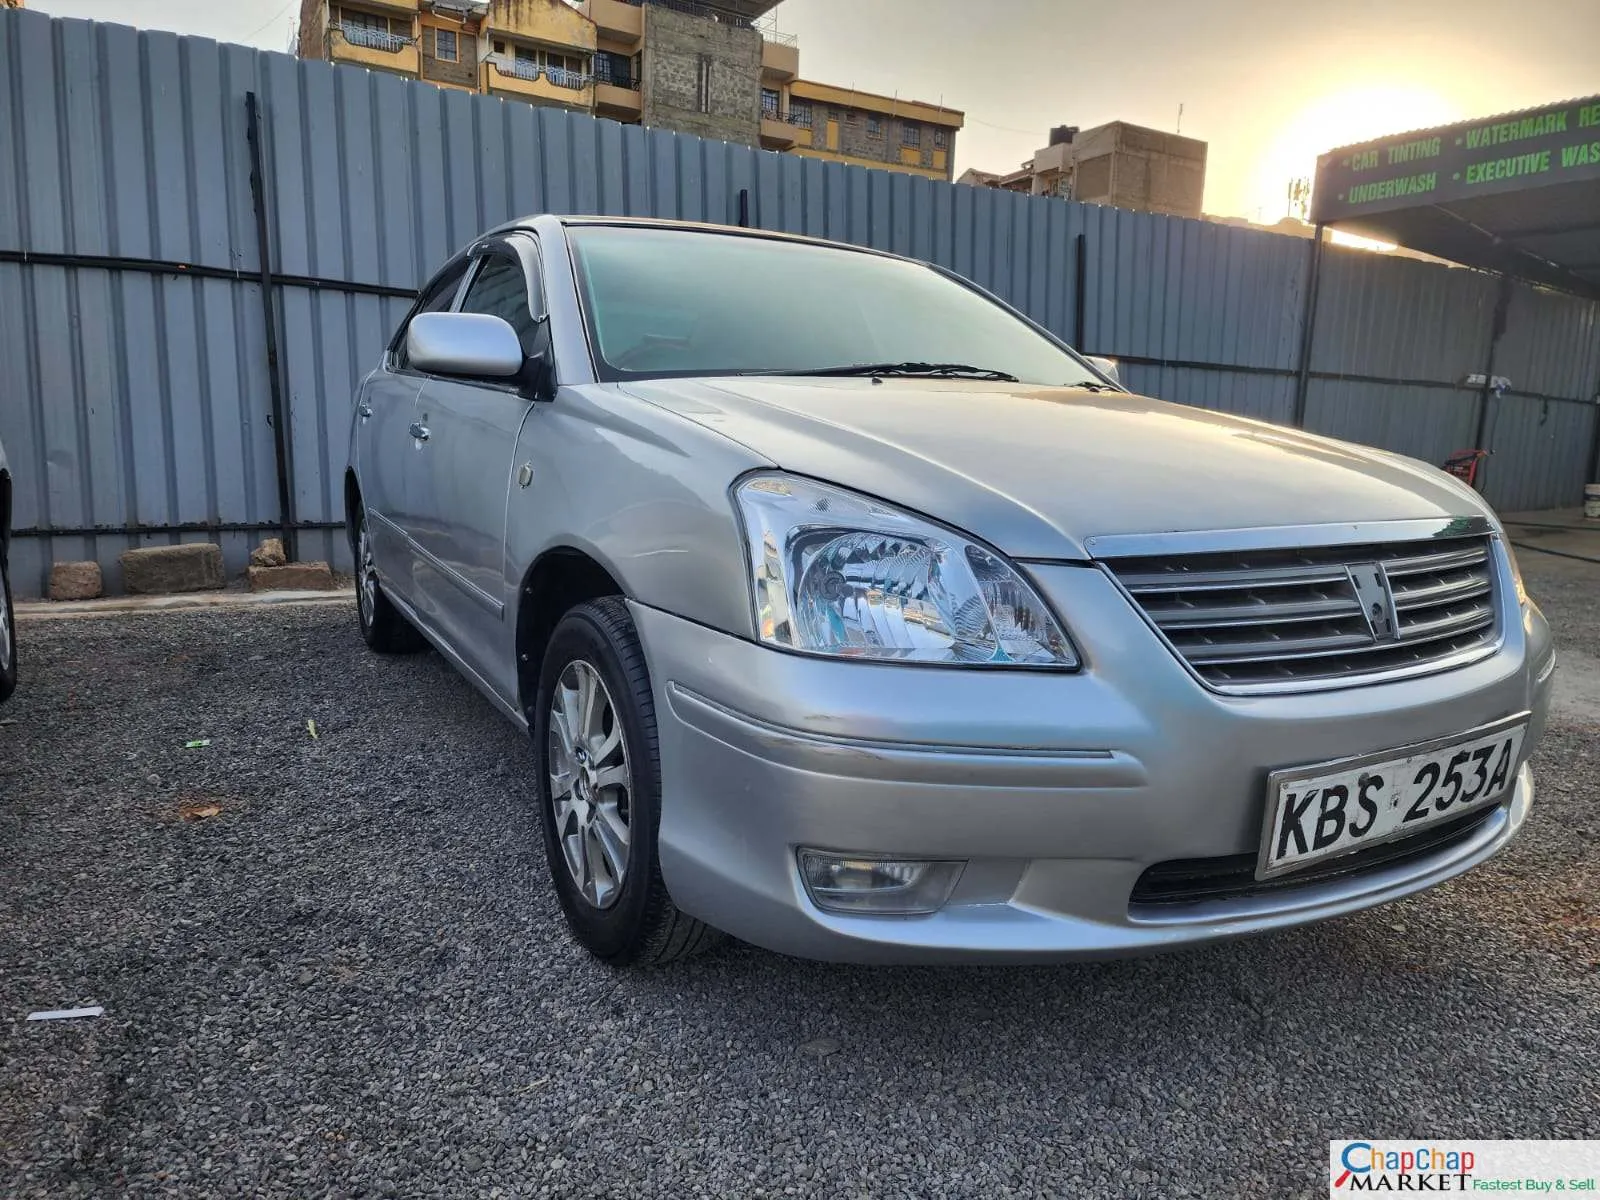 Cars Cars For Sale/Vehicles-Toyota PREMIO 240 2005 540K You pay 30% Deposit Trade in Ok Hot Deal 6